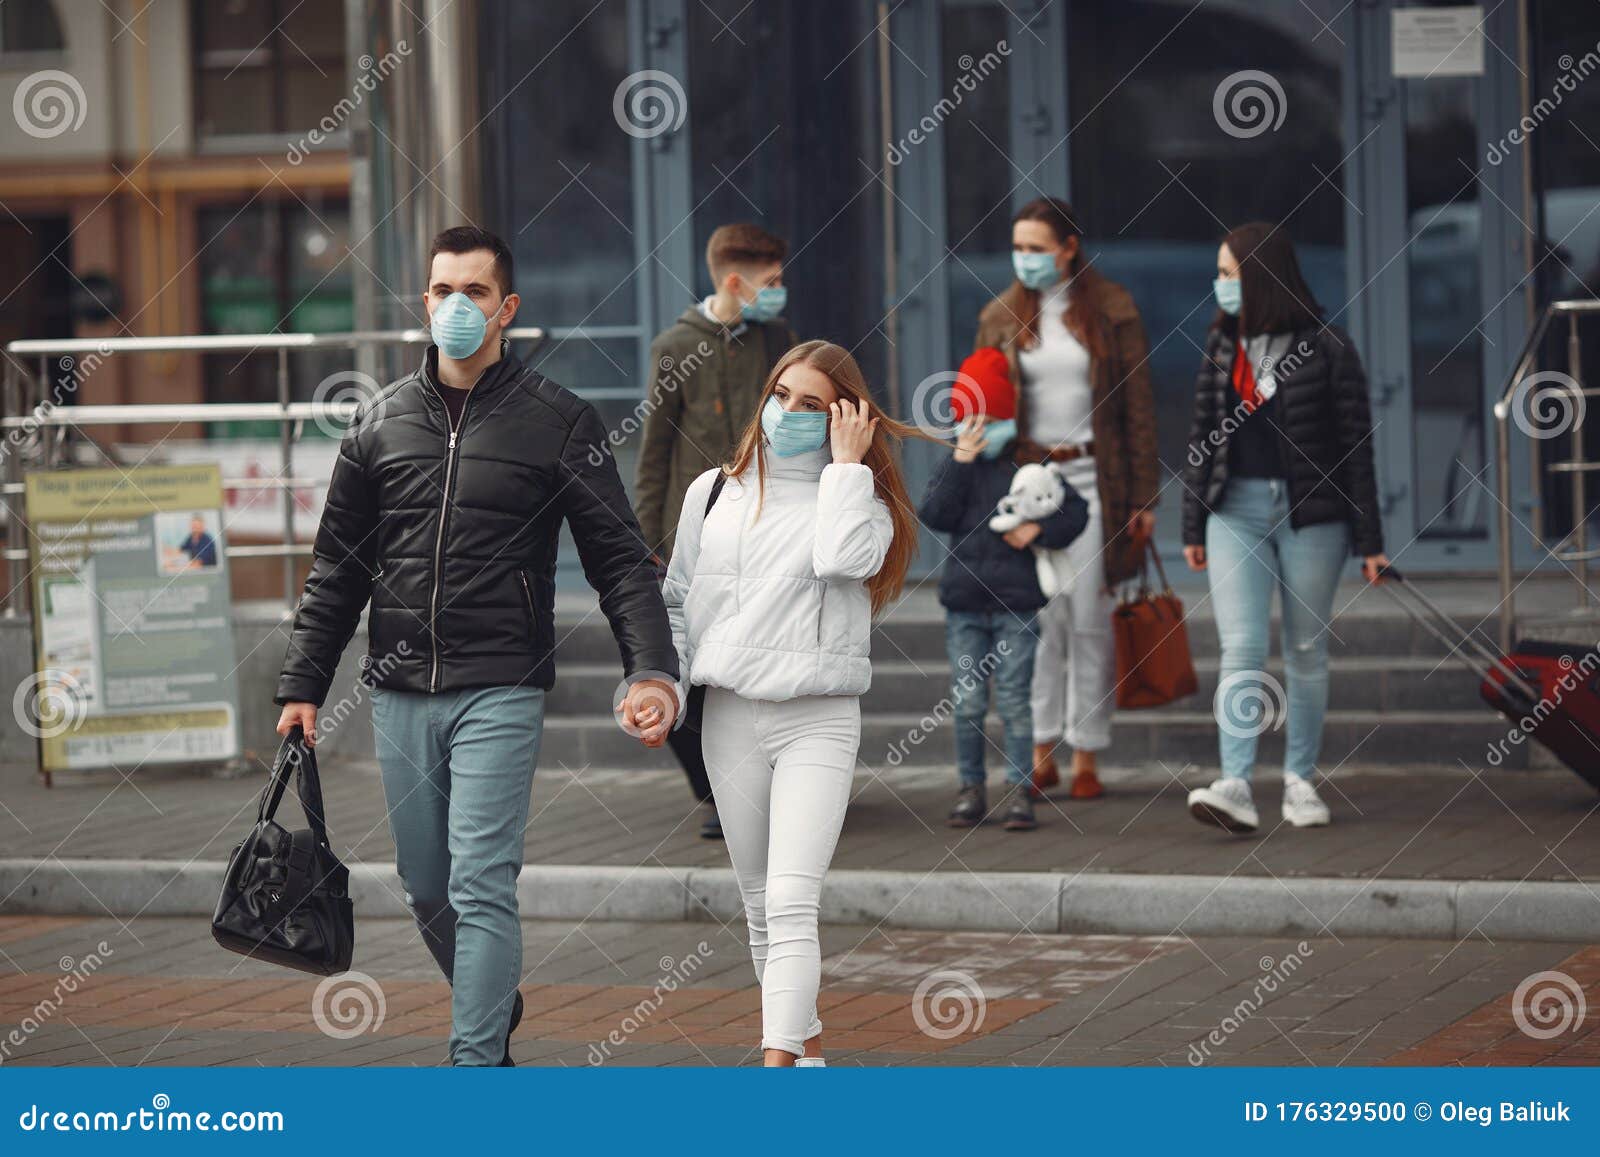 travelers leaving airport are wearing protective masks